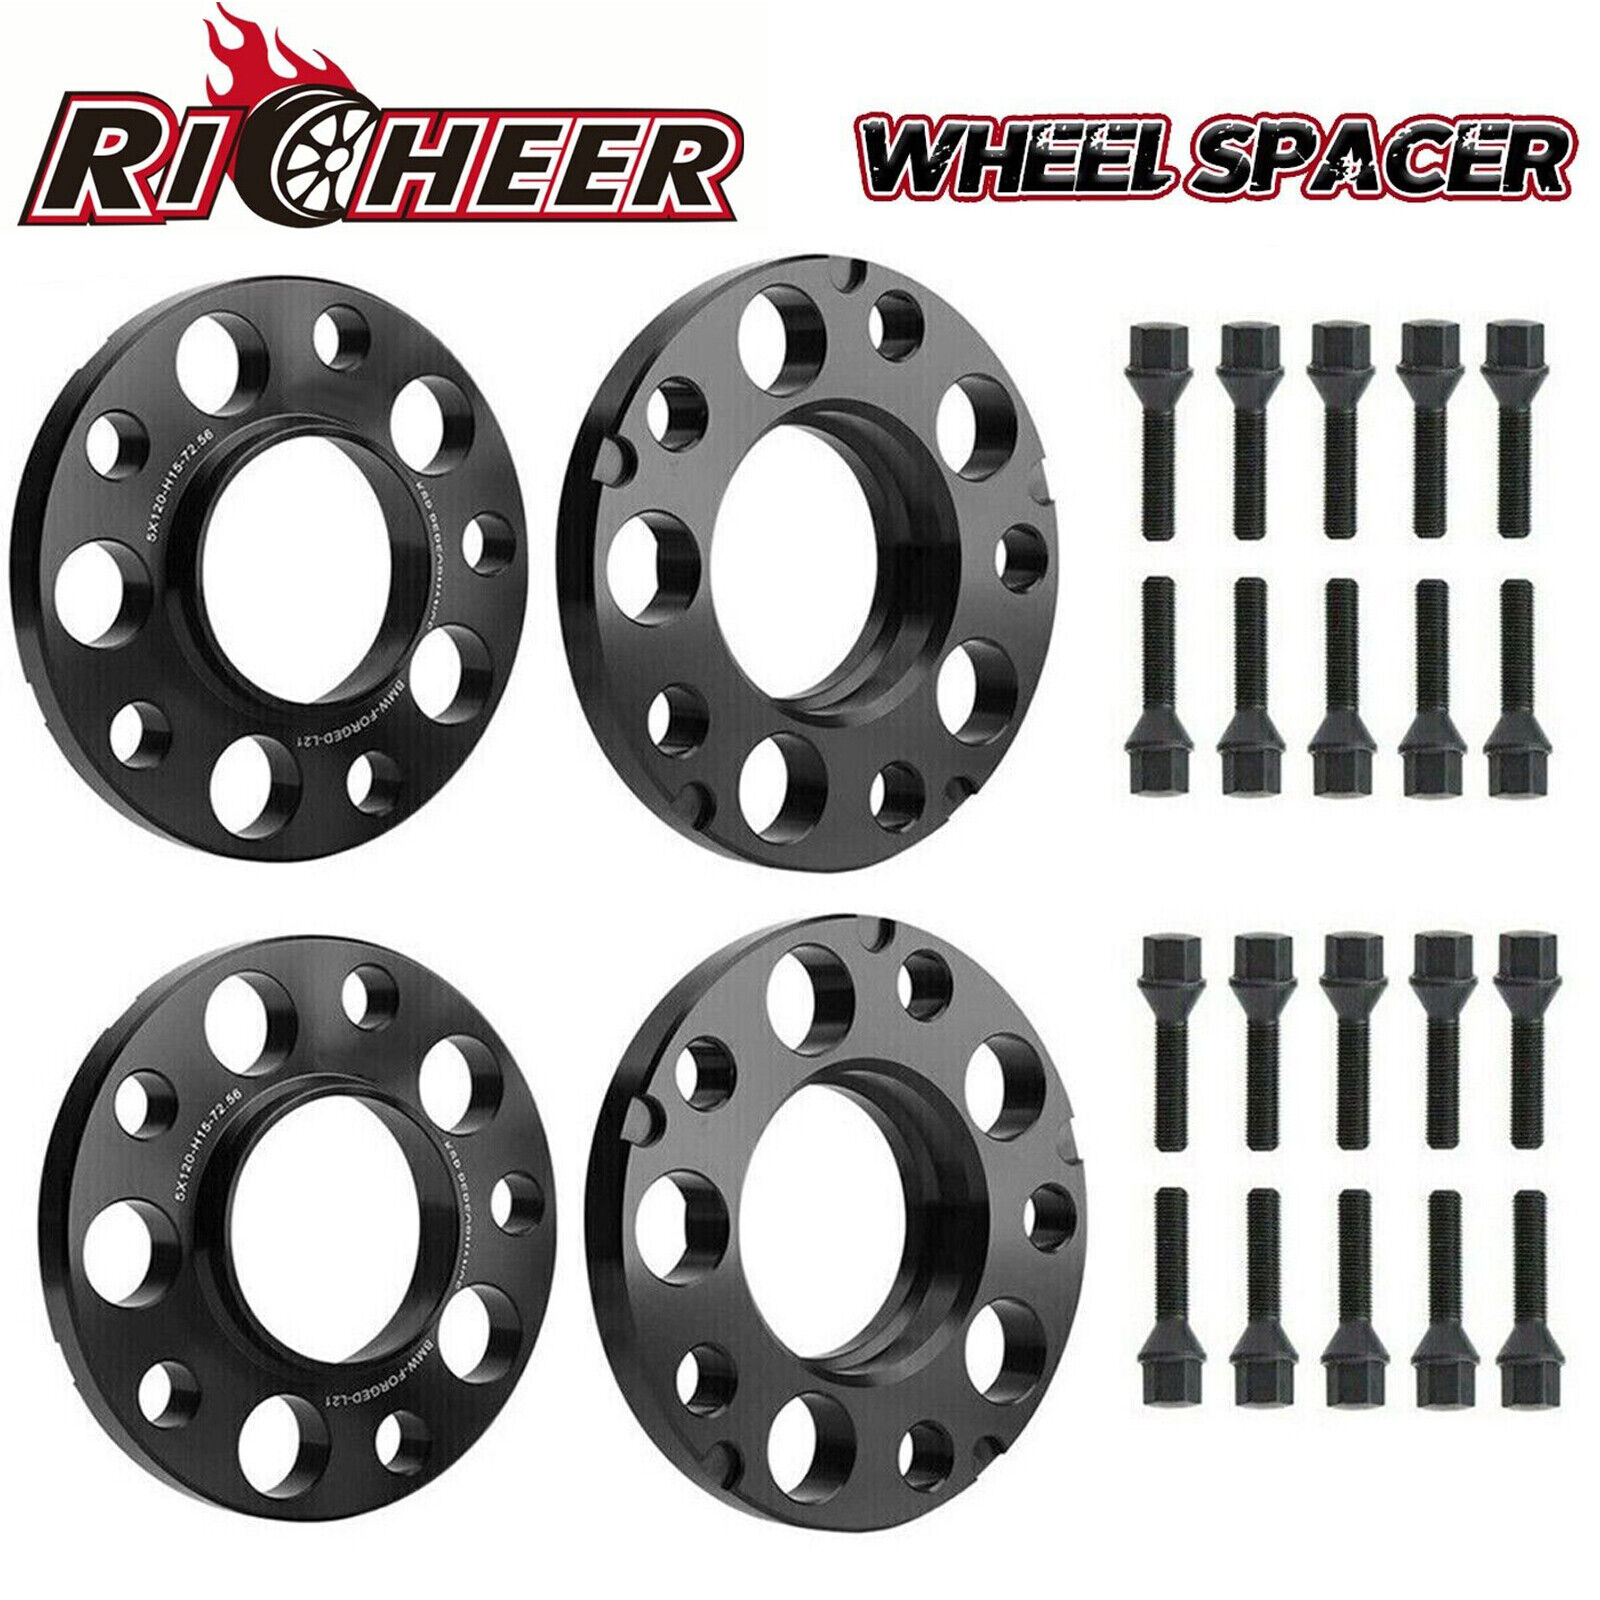 15 + 20mm 5x120 Wheel Spacers HubCentric For BMW F Series F30 F32 F33 F80 F10 M3